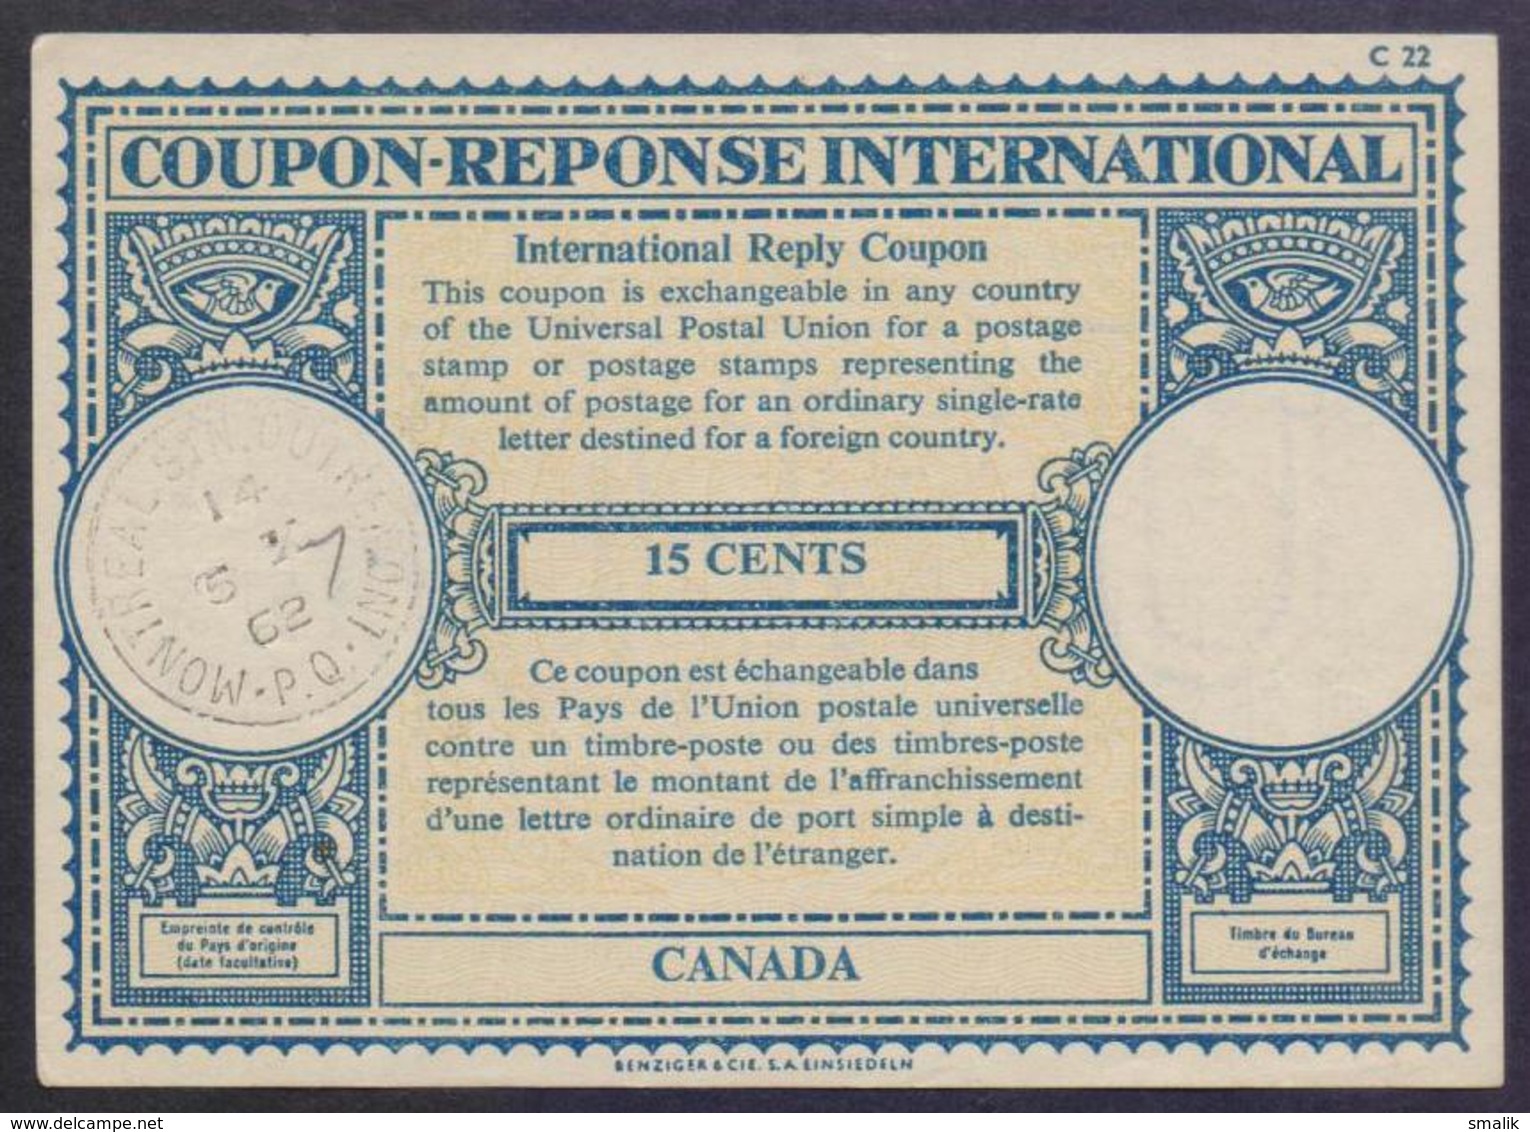 CANADA - 15 Cents London Type IRC COUPON REPONSE INTERNATIONAL REPLY, UPU, Cancelled 5.10. 1962 - Antwortcoupons